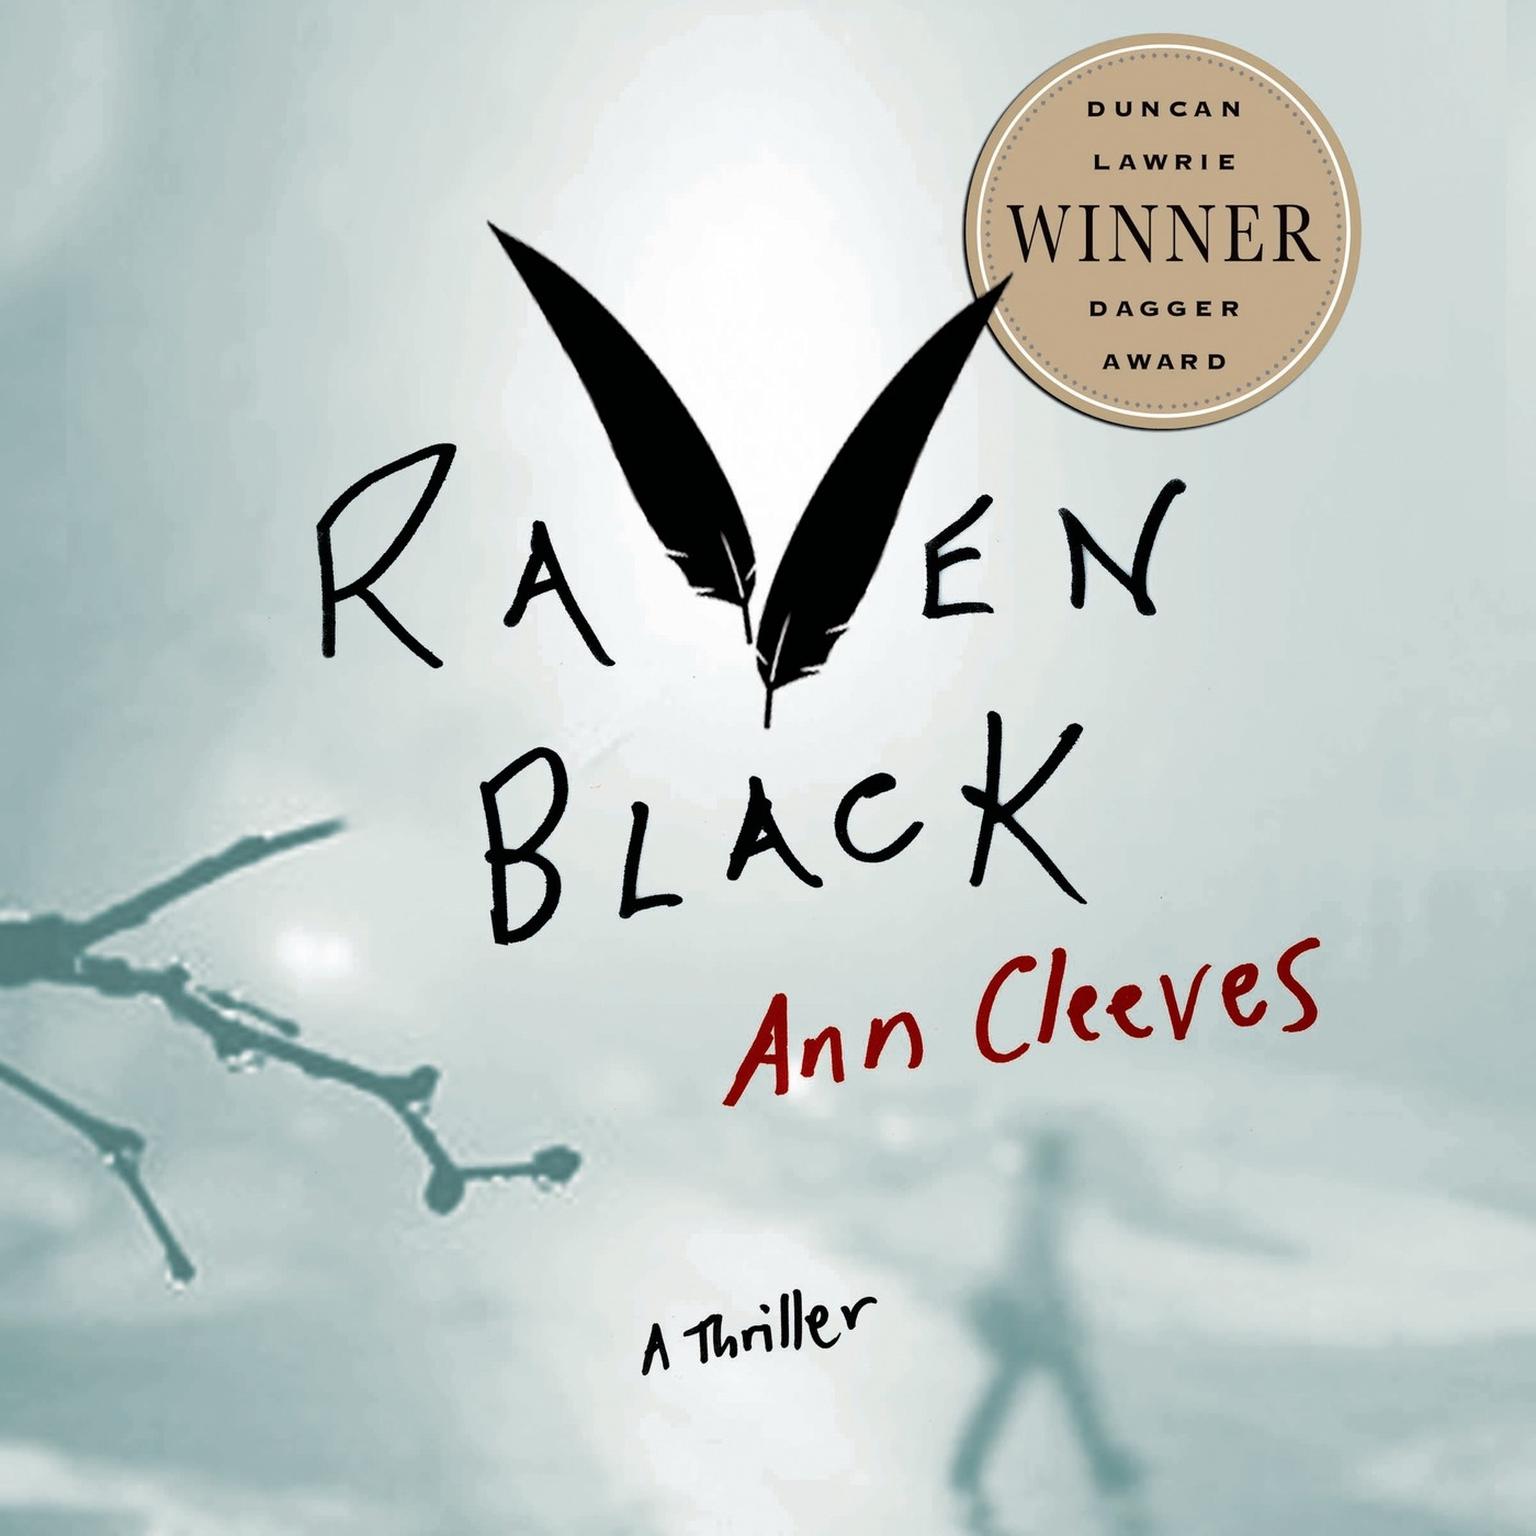 Raven Black: Book One of the Shetland Island Mysteries Audiobook, by Ann Cleeves